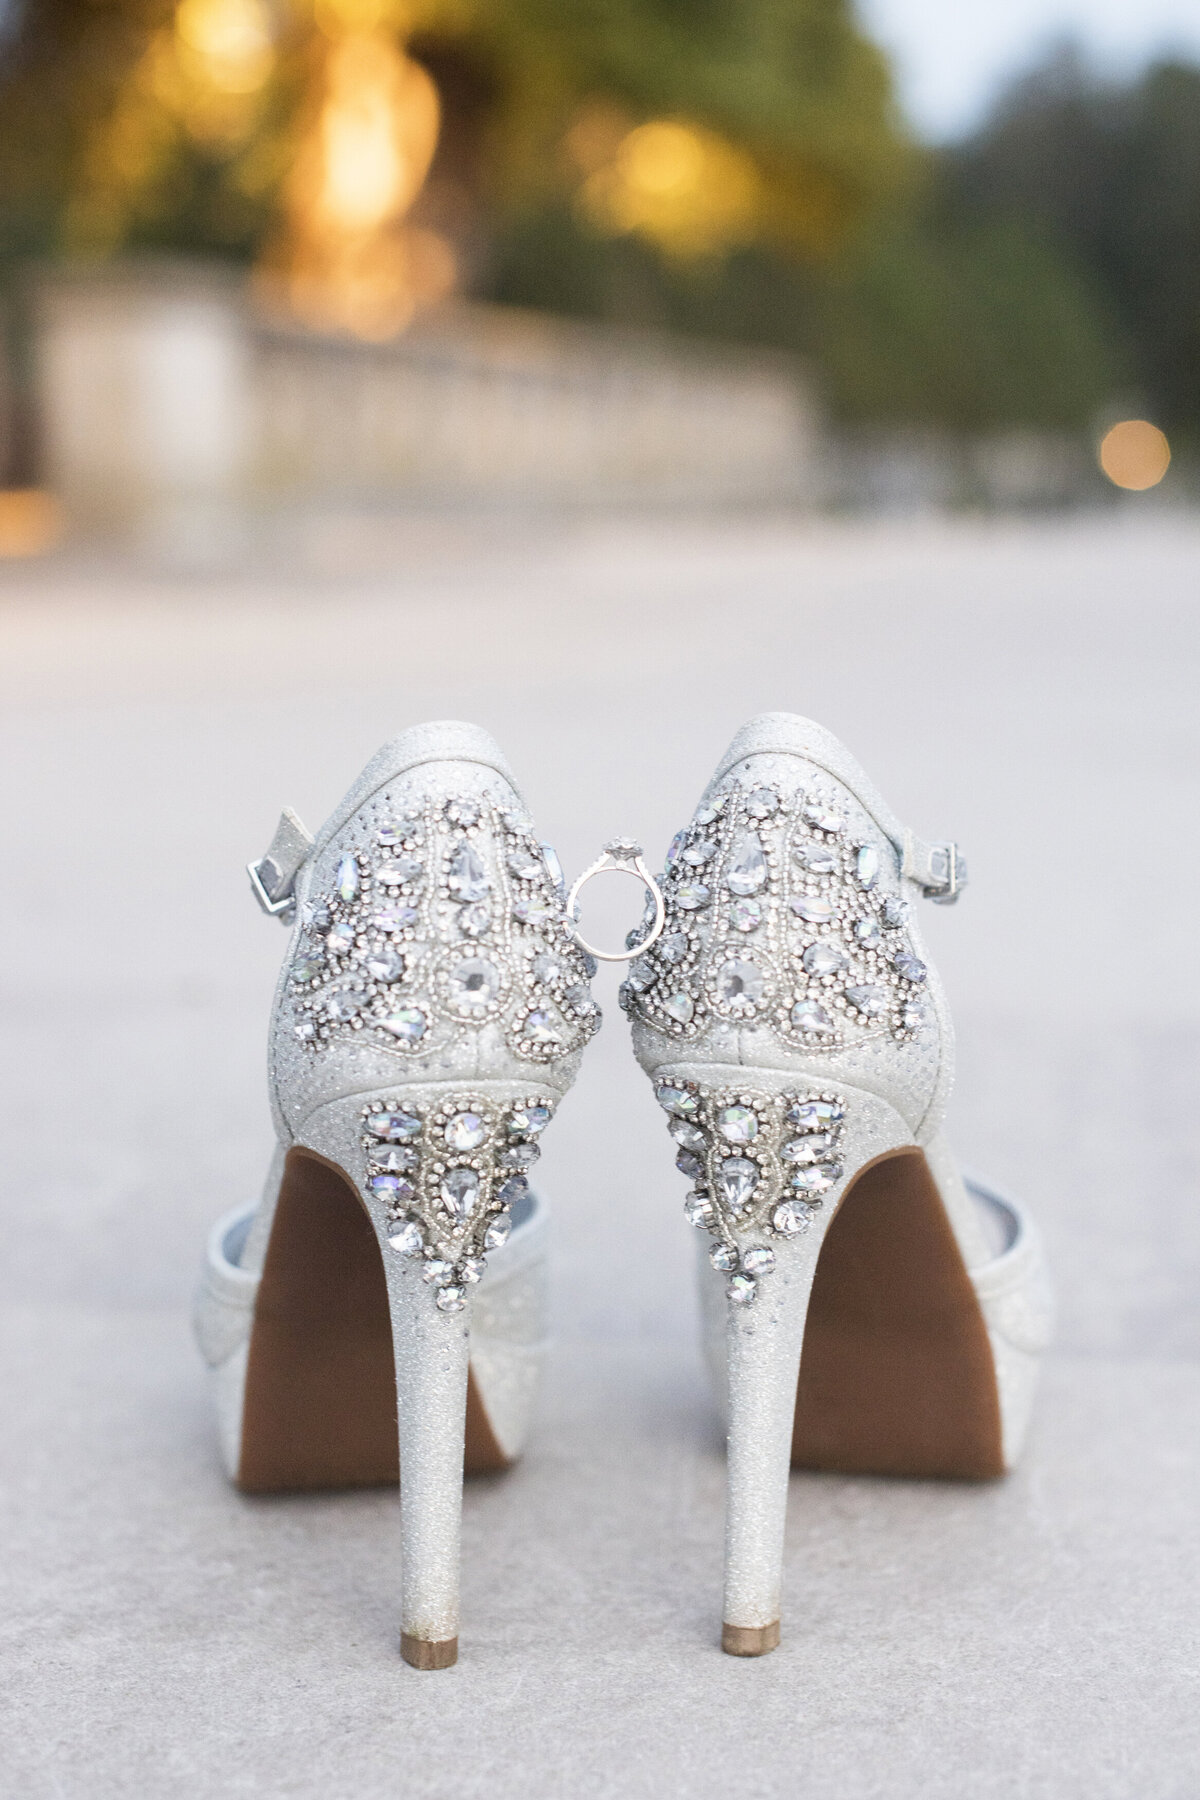 Biltmore Estate wedding photography shoes with ring Asheville, NC